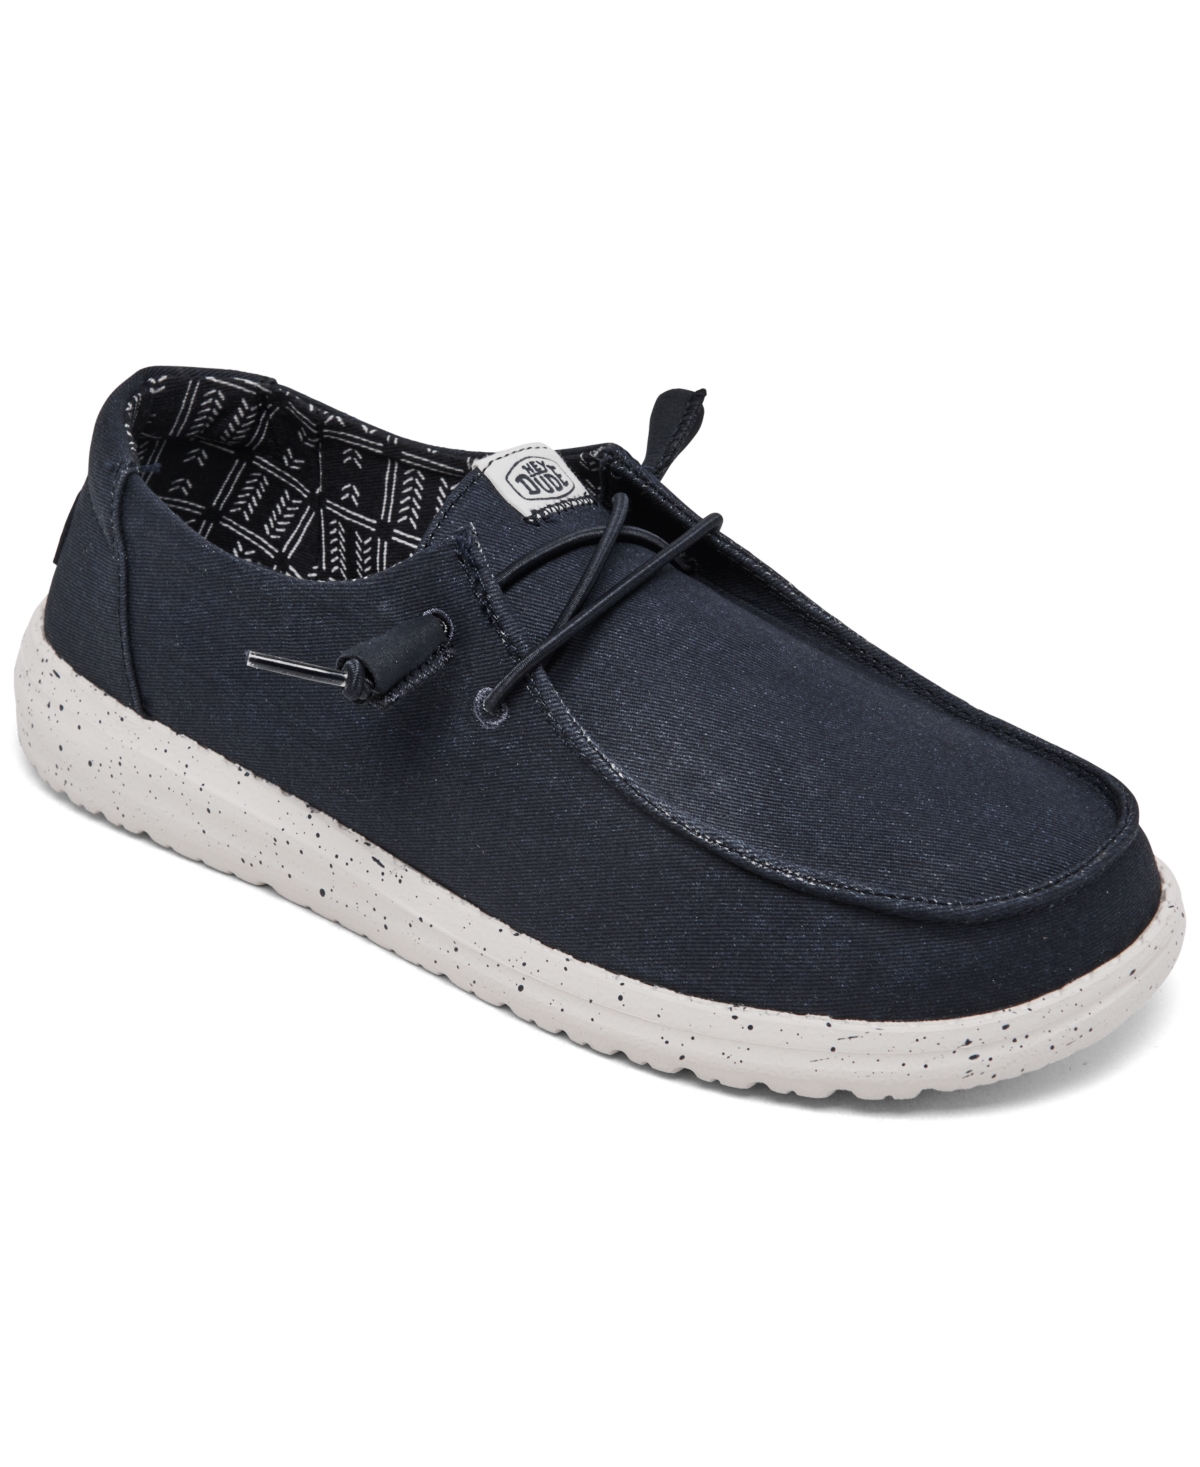 Women's Wendy Sport Mesh Casual Sneakers from Finish Line - Navy/White